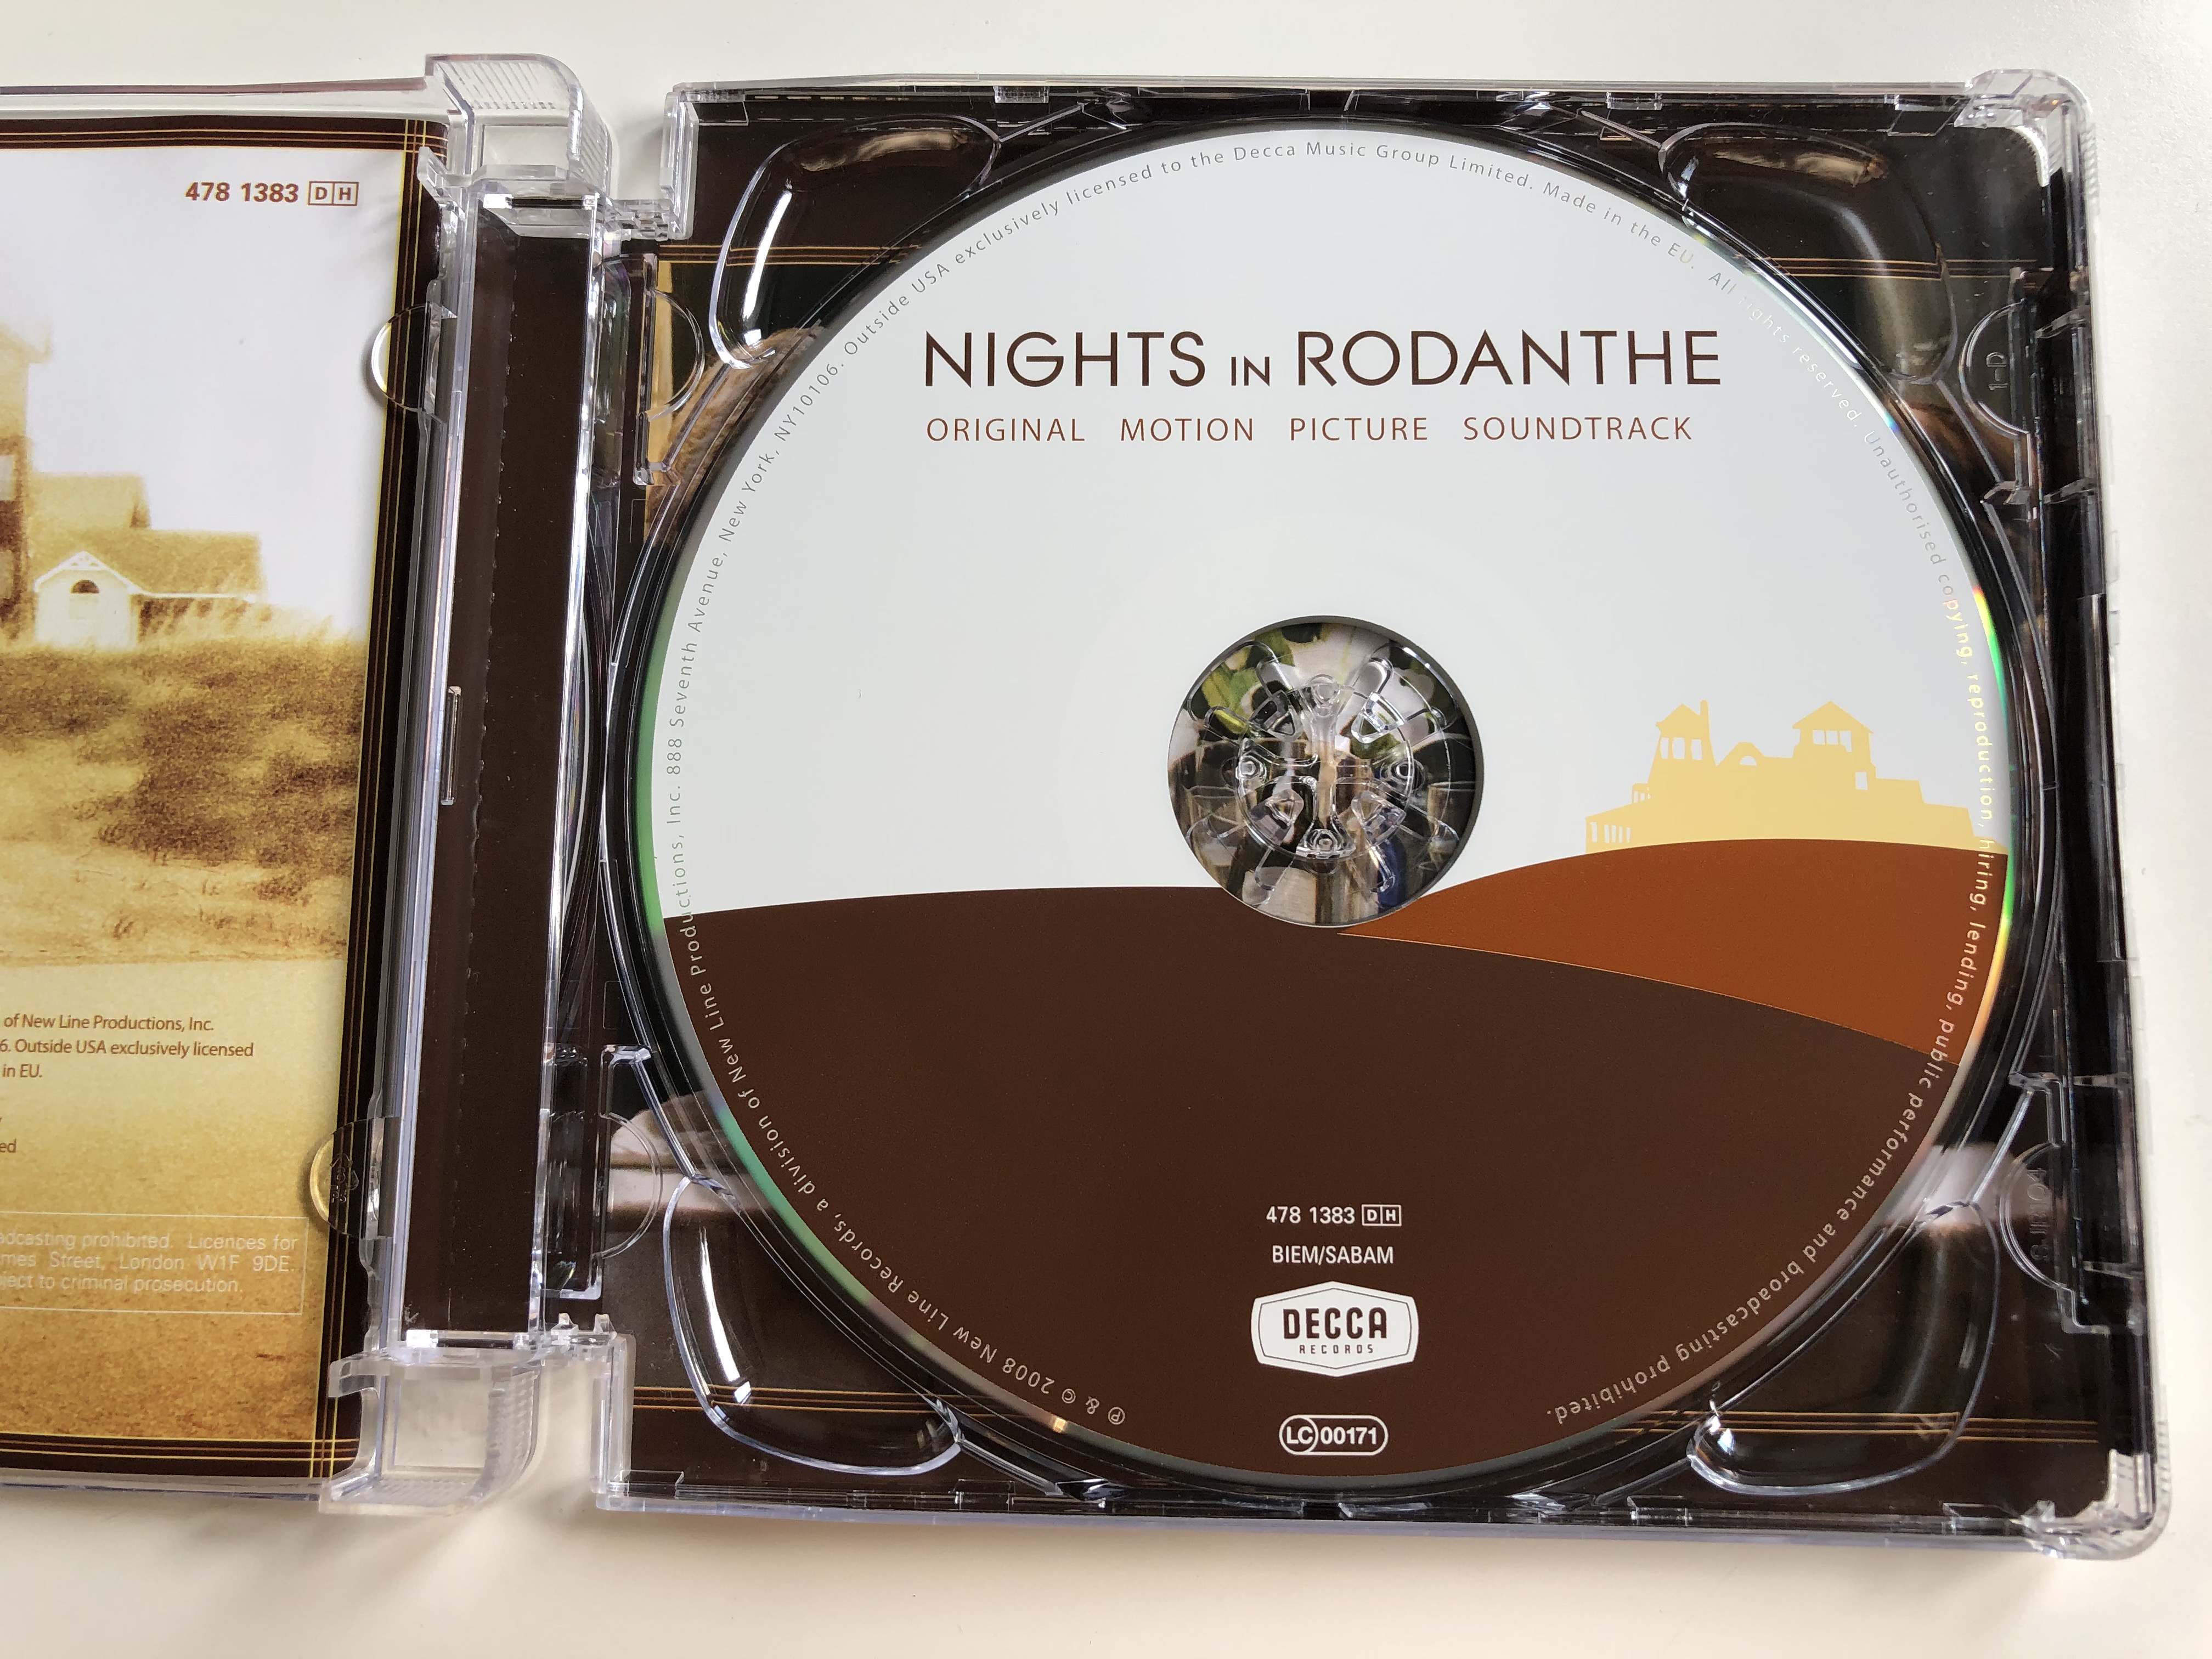 nights-in-rodanthe-original-motion-picture-soundtrack-based-on-the-best-selling-novel-from-the-author-of-the-notebook-decca-music-group-limited-audio-cd-2008-478-1383-5-.jpg